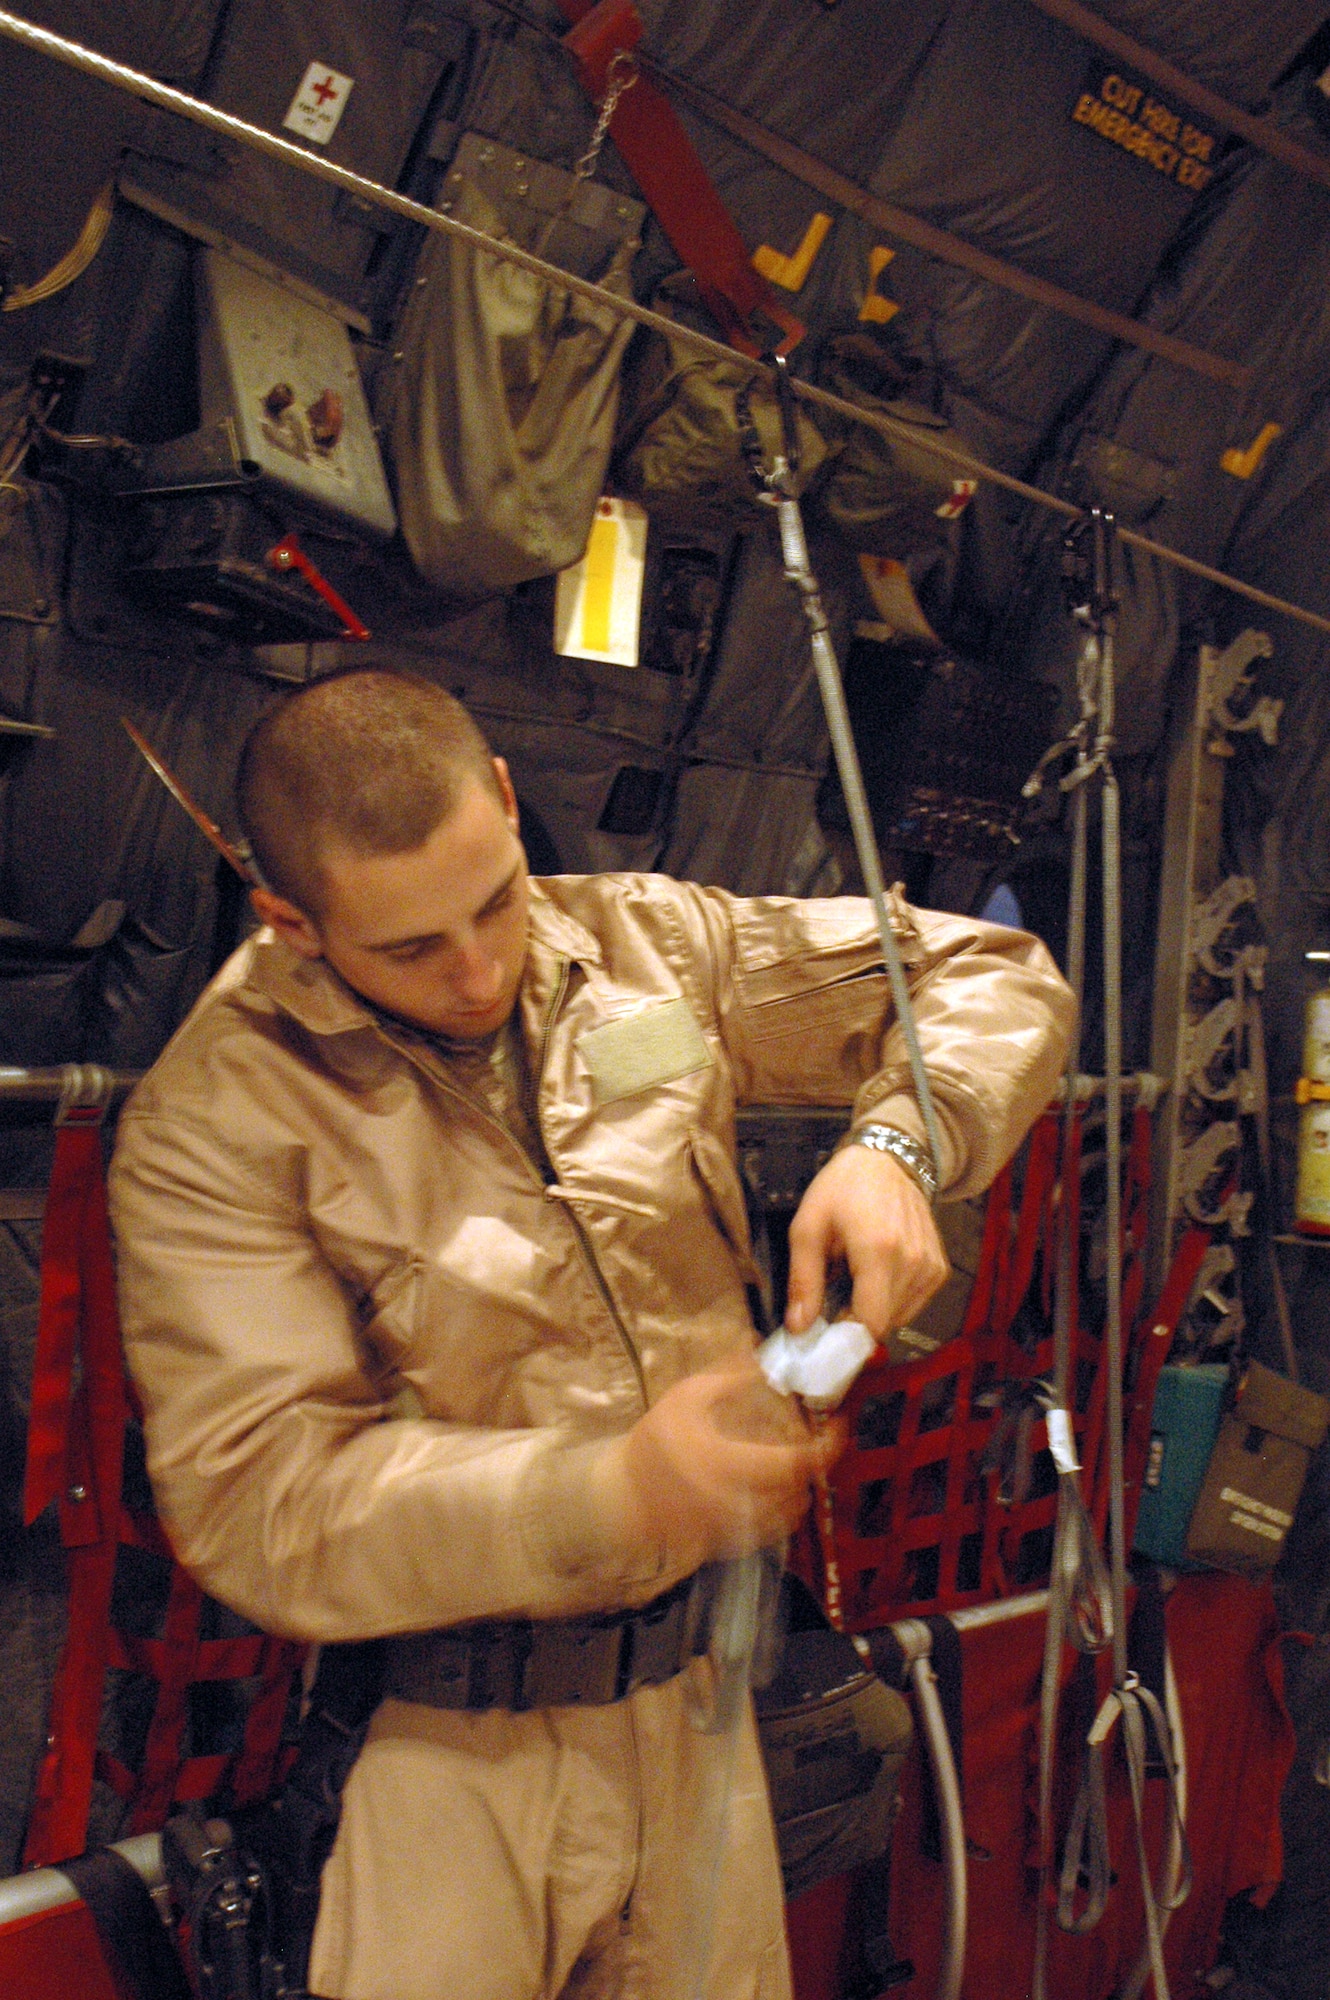 SOUTHWEST ASIA - Senior Airman William Moody, 40th Expeditionary Airlift Squadron loadmaster, sets up static lines to help rip open boxes of leaflets. (U.S. Air Force photo/Staff Sgt. Jason Barebo)